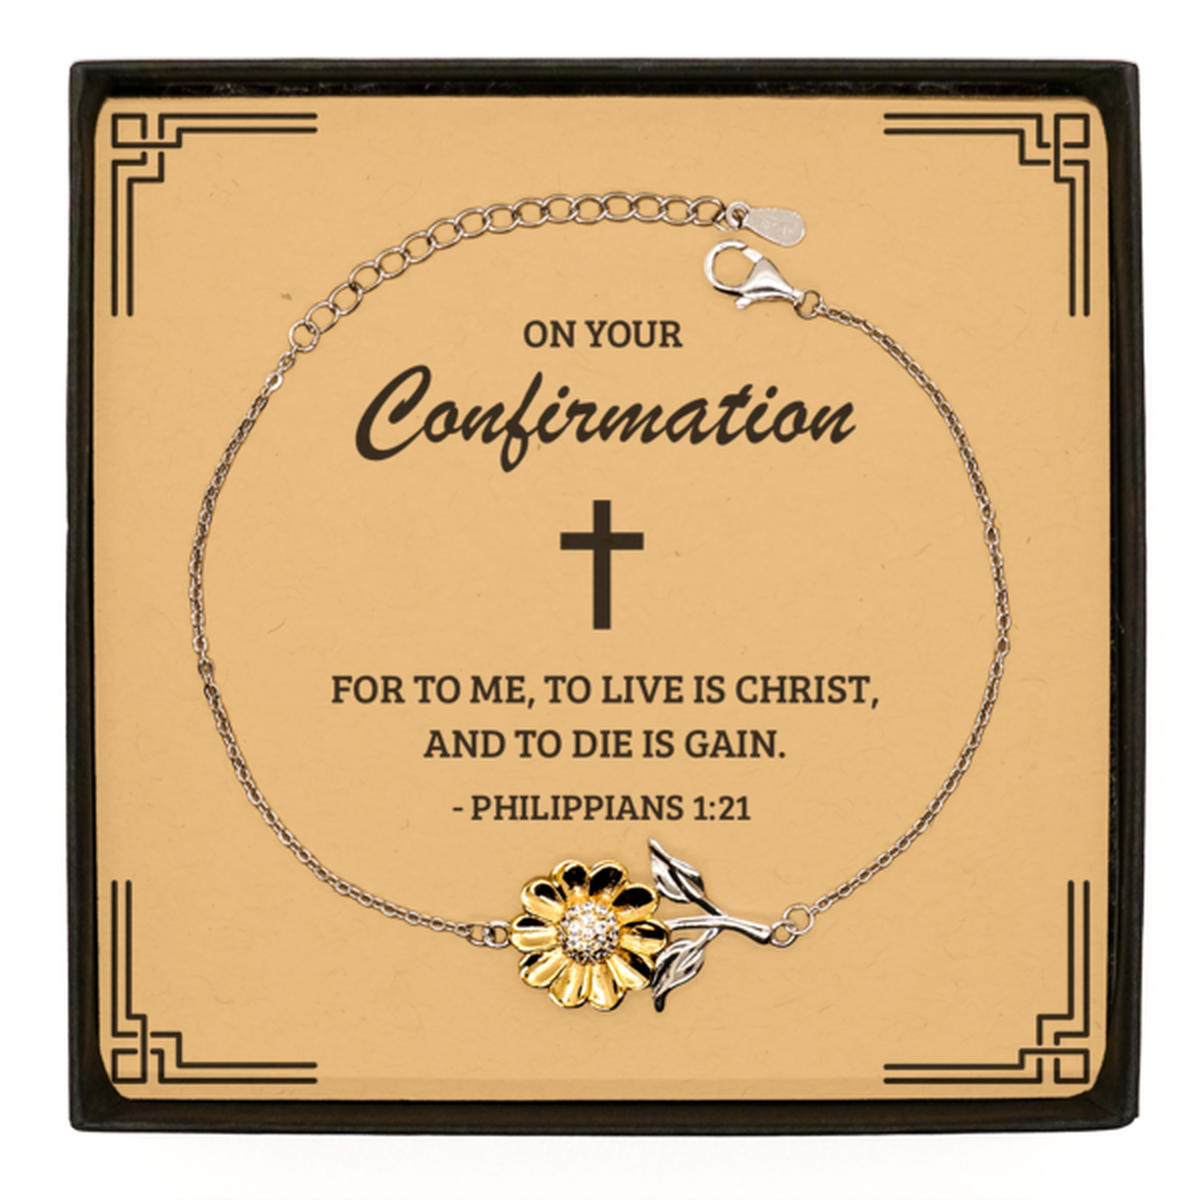 Confirmation Gifts for Teenage Girls, To live is Christ, and to die is gain, .925 Sterling Silver Sunflower Bracelet with Bible Verse Message Card, Religious Catholic Bracelet for Daughter, Granddaughter